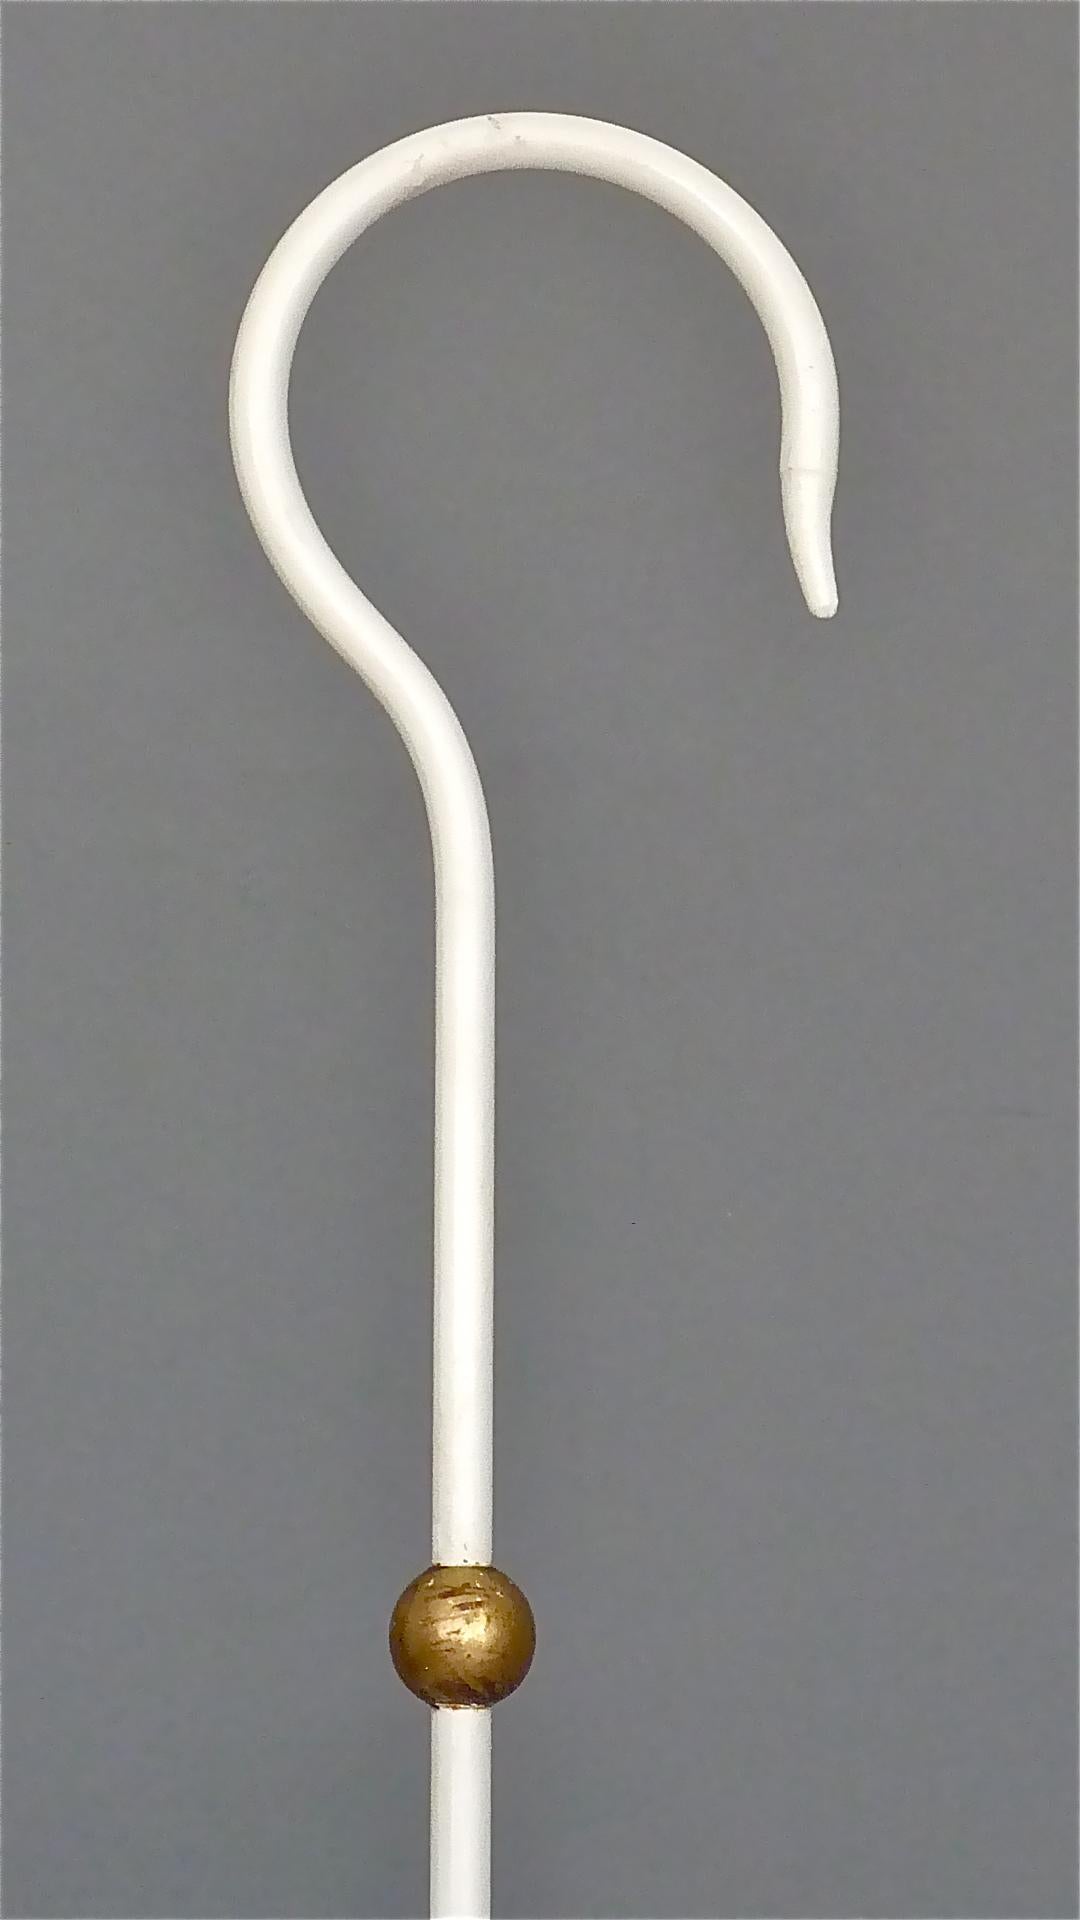 Mid-20th Century Chic French Umbrella Stand Matégot Biny Style White Enameled Metal Brass, 1950s For Sale